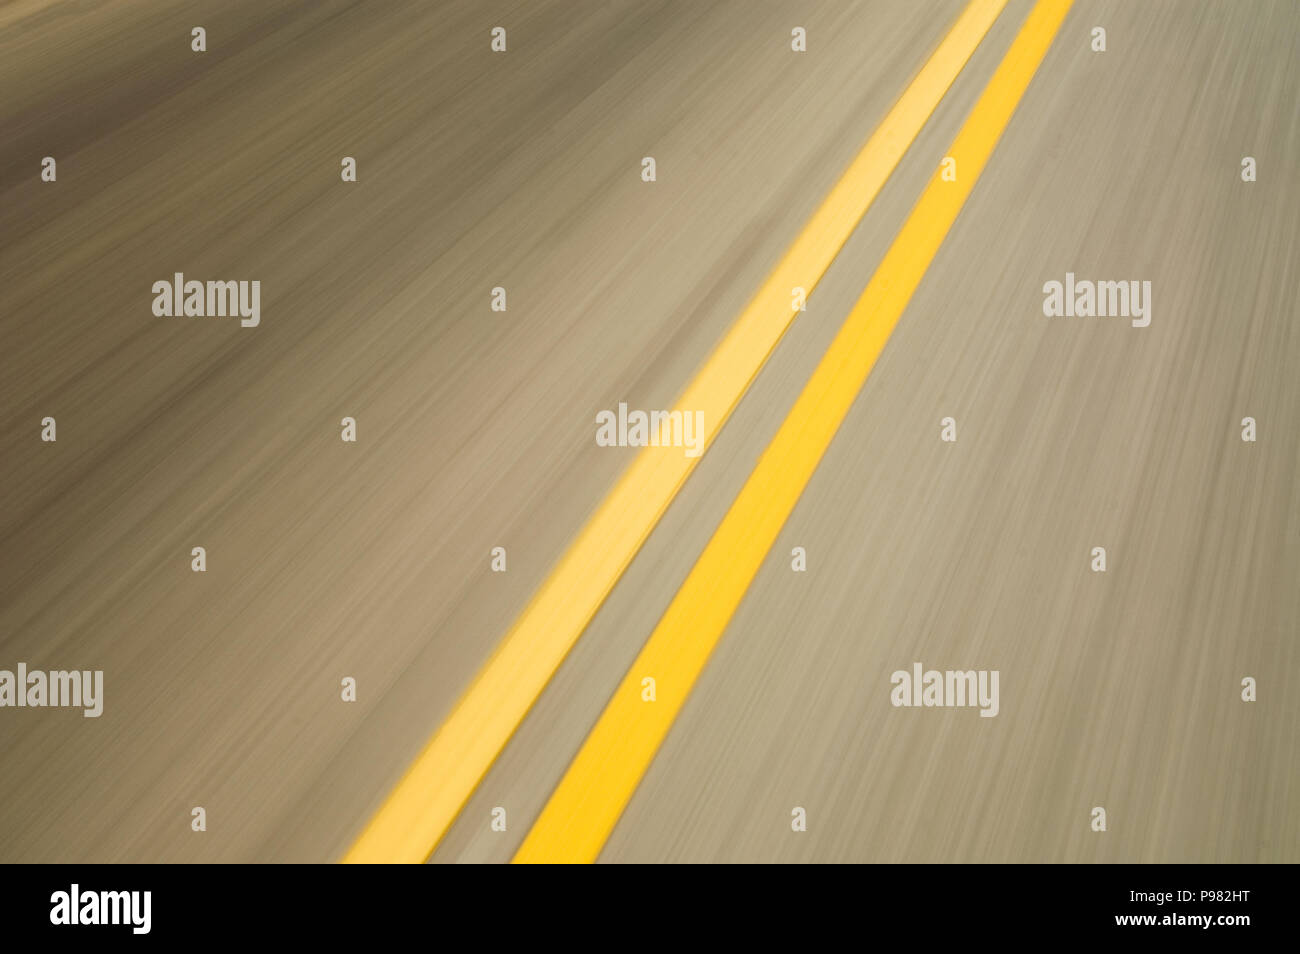 motion blurred double yellow lines on road Stock Photo